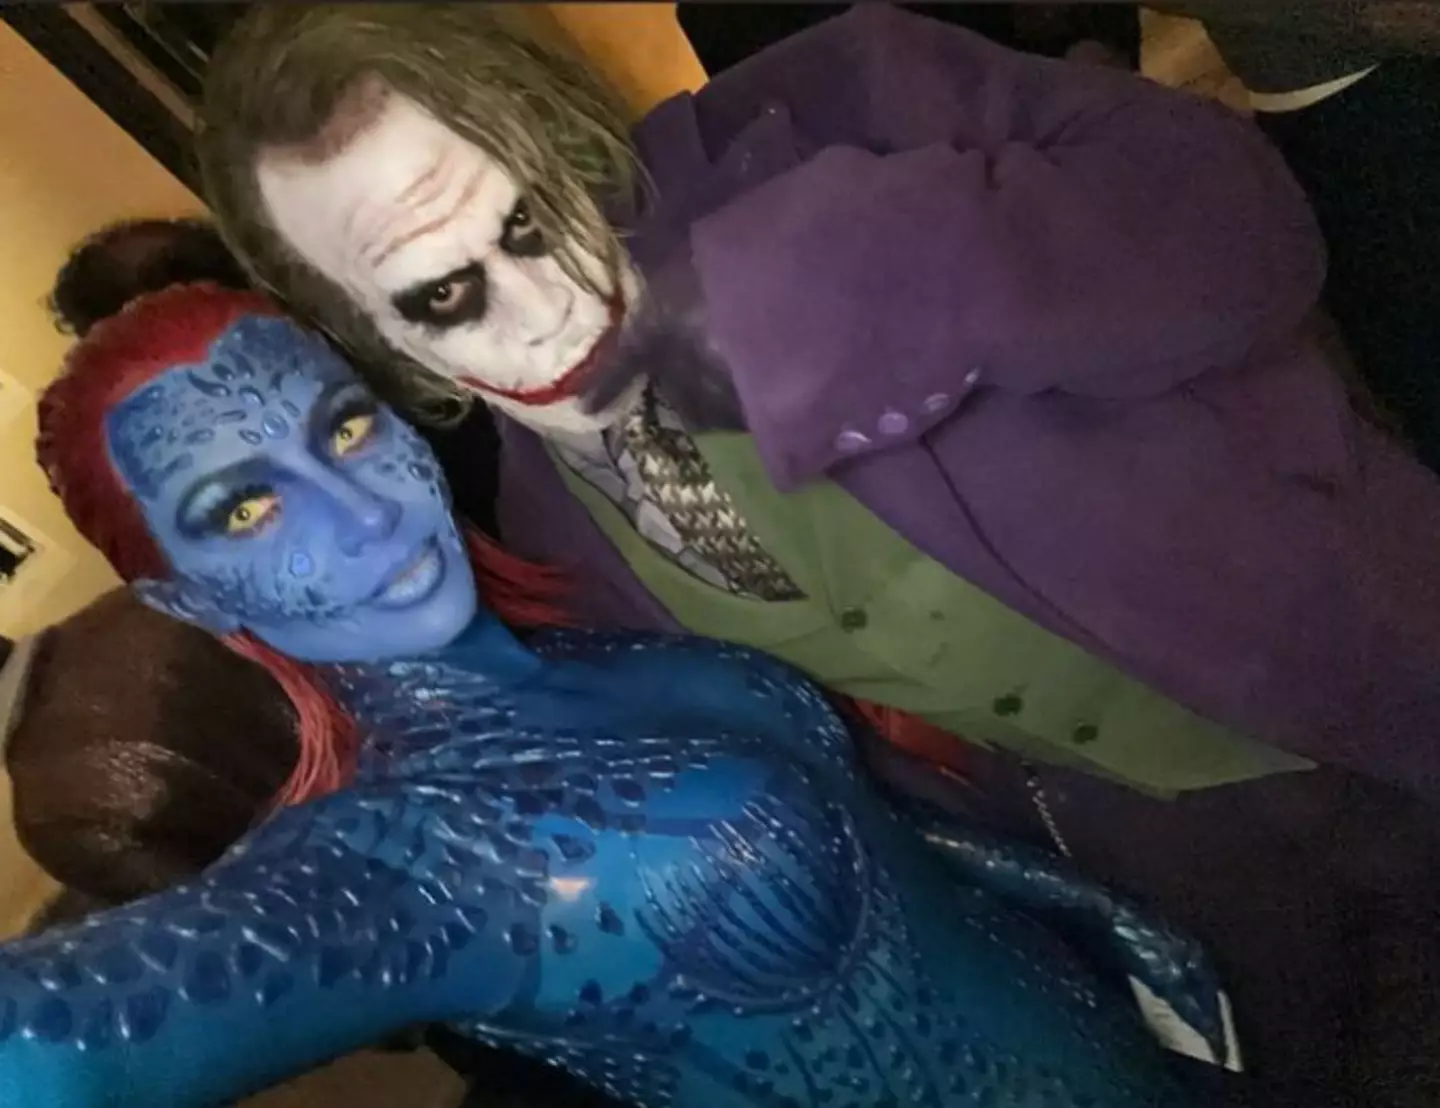 Kim dressed as Mystique for Halloween.